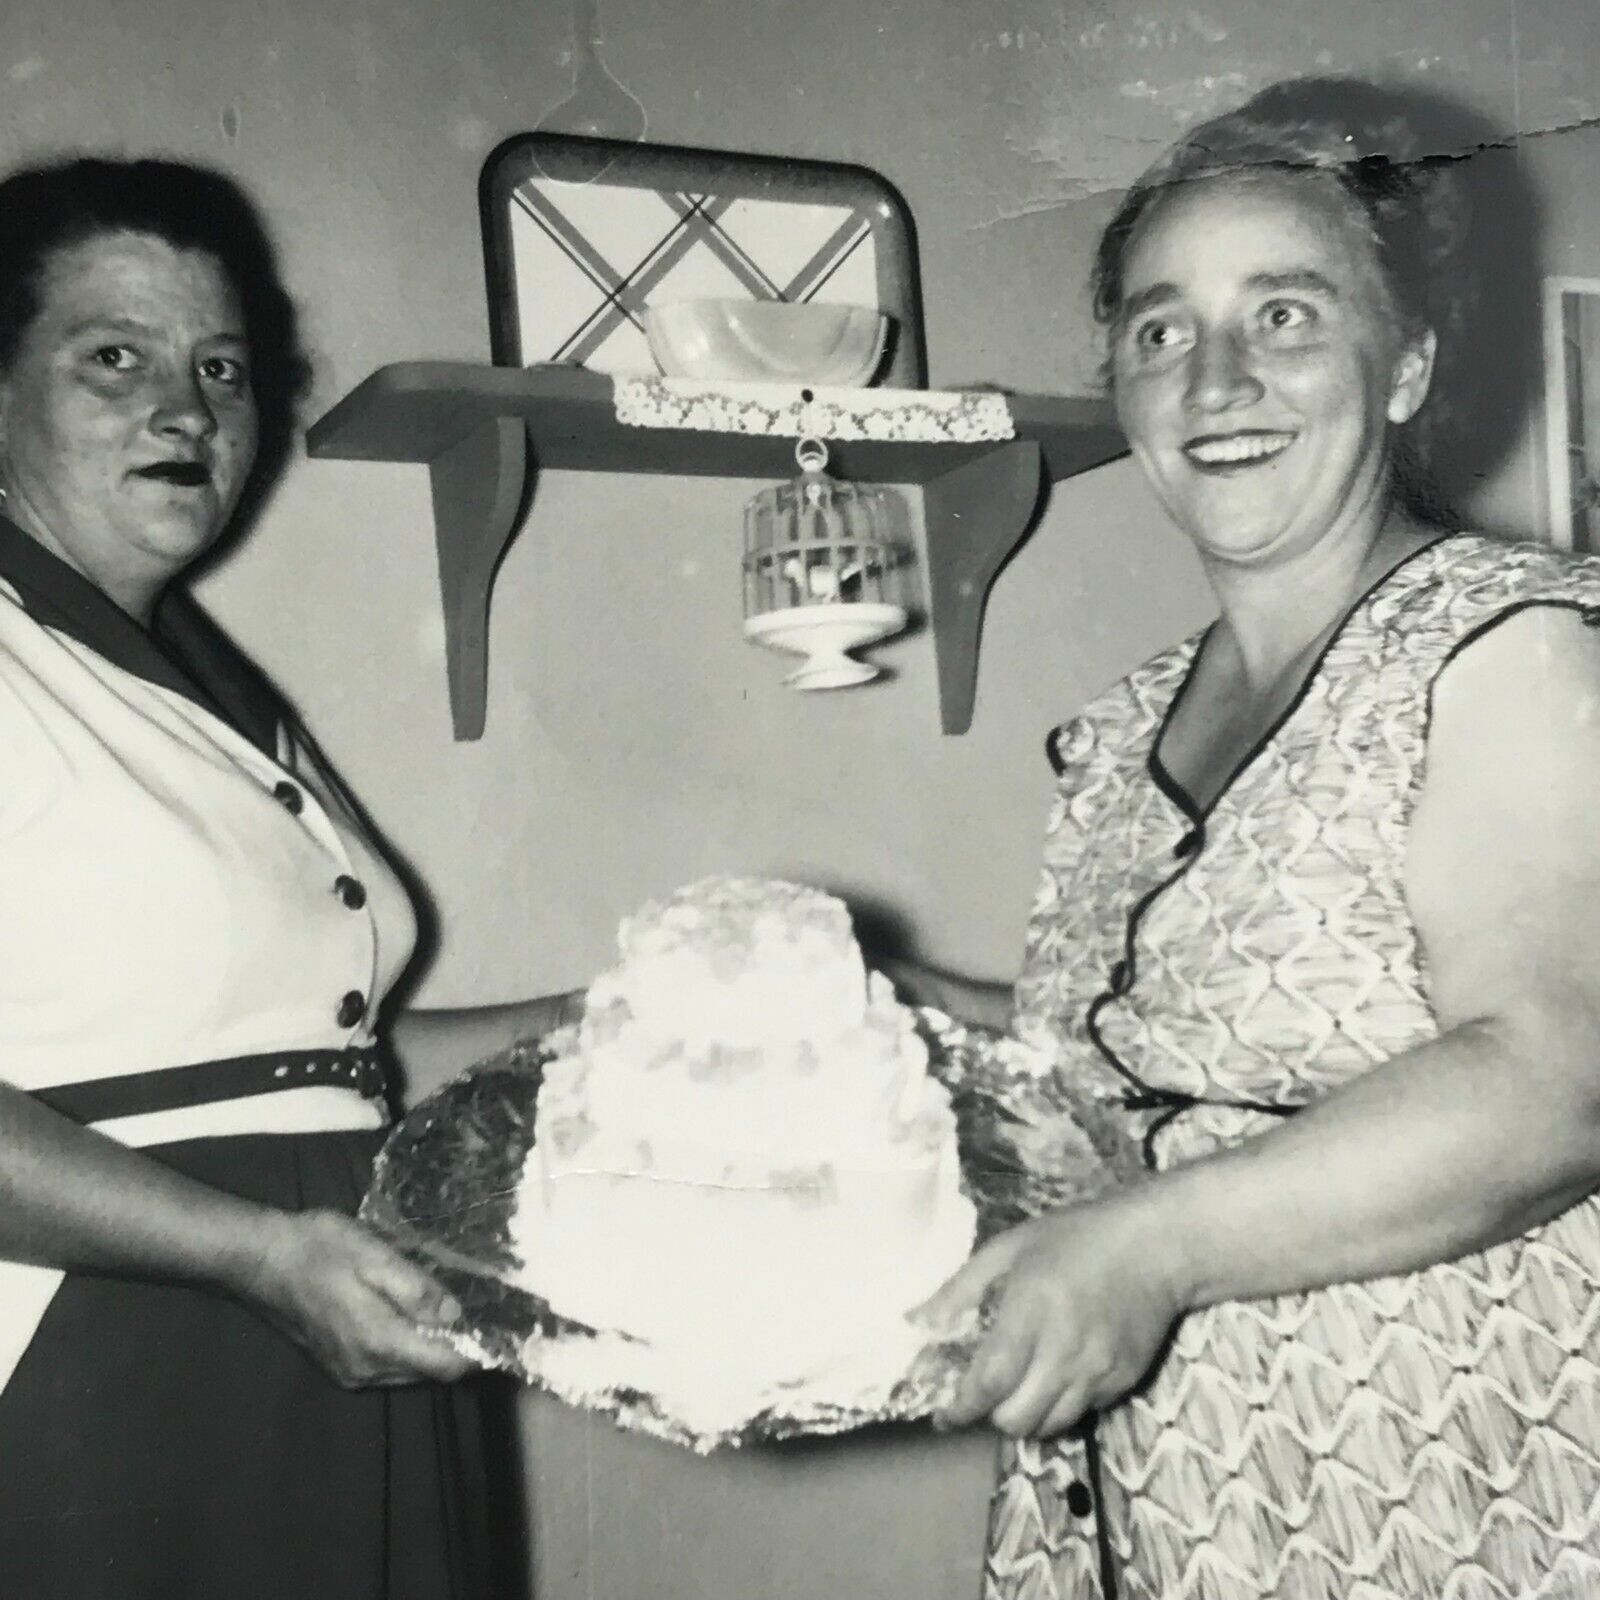 Vintage Black and White Photo Large Obese Women Holding Tiered Cake Smiling